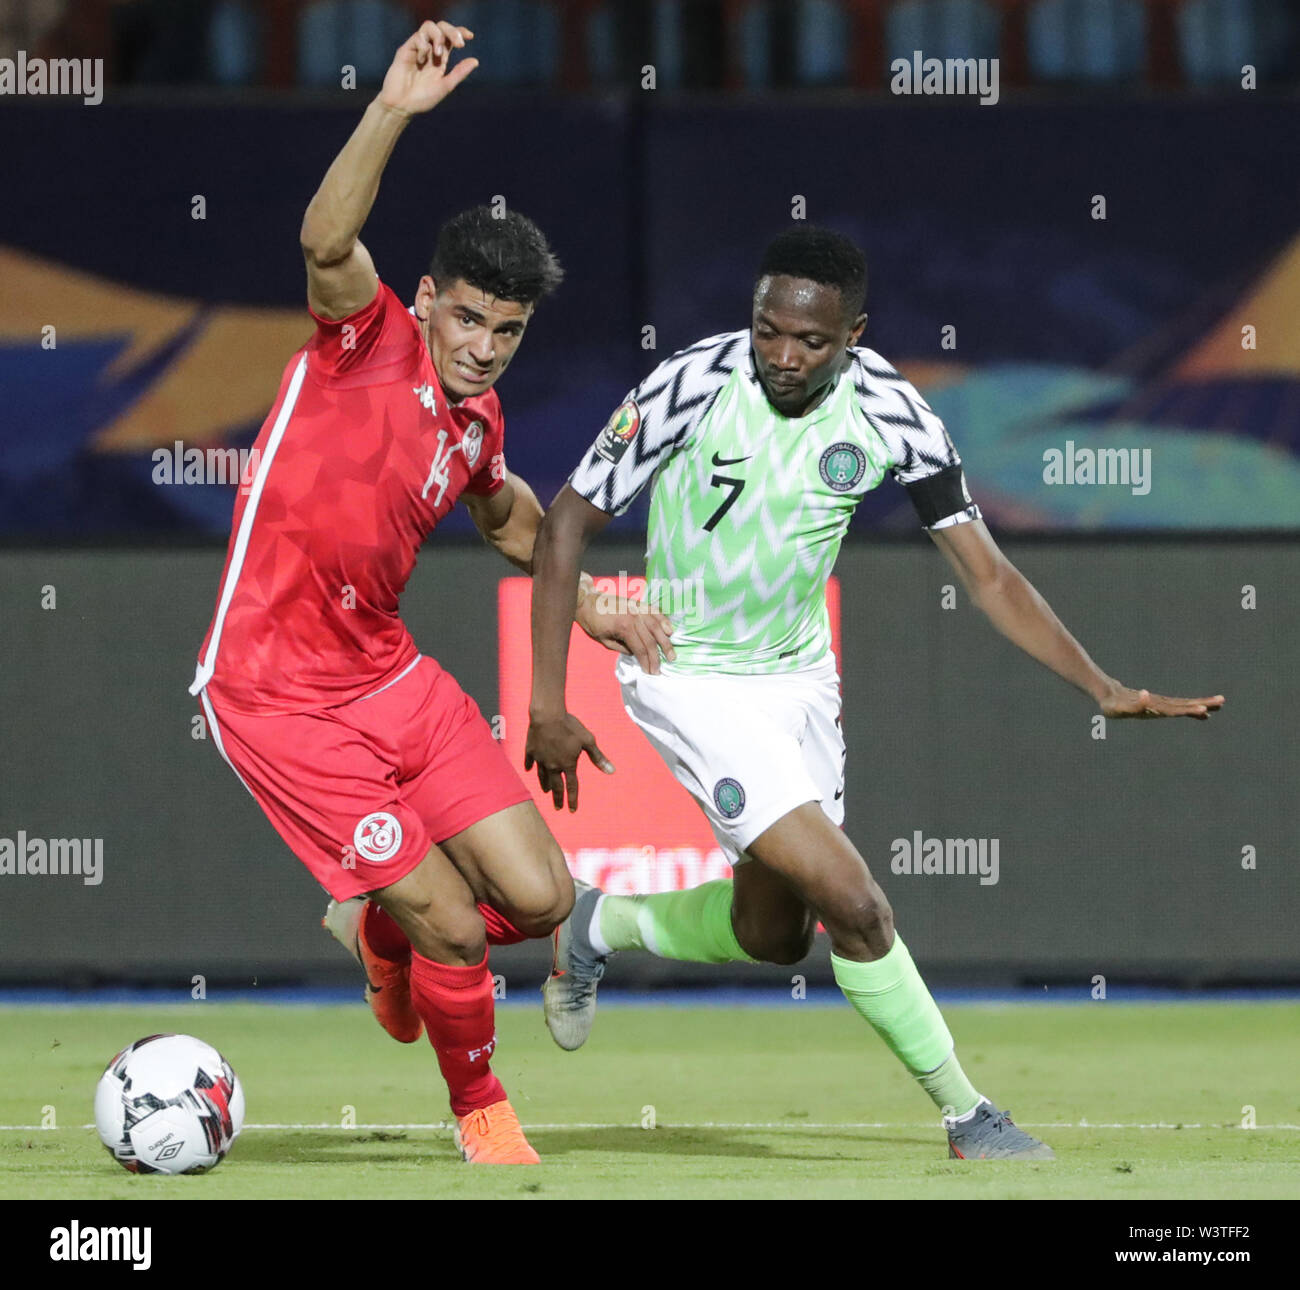 Cairo, Egypt. 17th July, 2019. Tunisia's Mohamed Drager vies for the ball with Nigeria's Ahmed Musa during the 2019 Africa Cup of Nations third place final soccer match between Tunisia and Nigeria at the Al-Salam Stadium. Credit: Gehad Hamdy/dpa/Alamy Live News Stock Photo